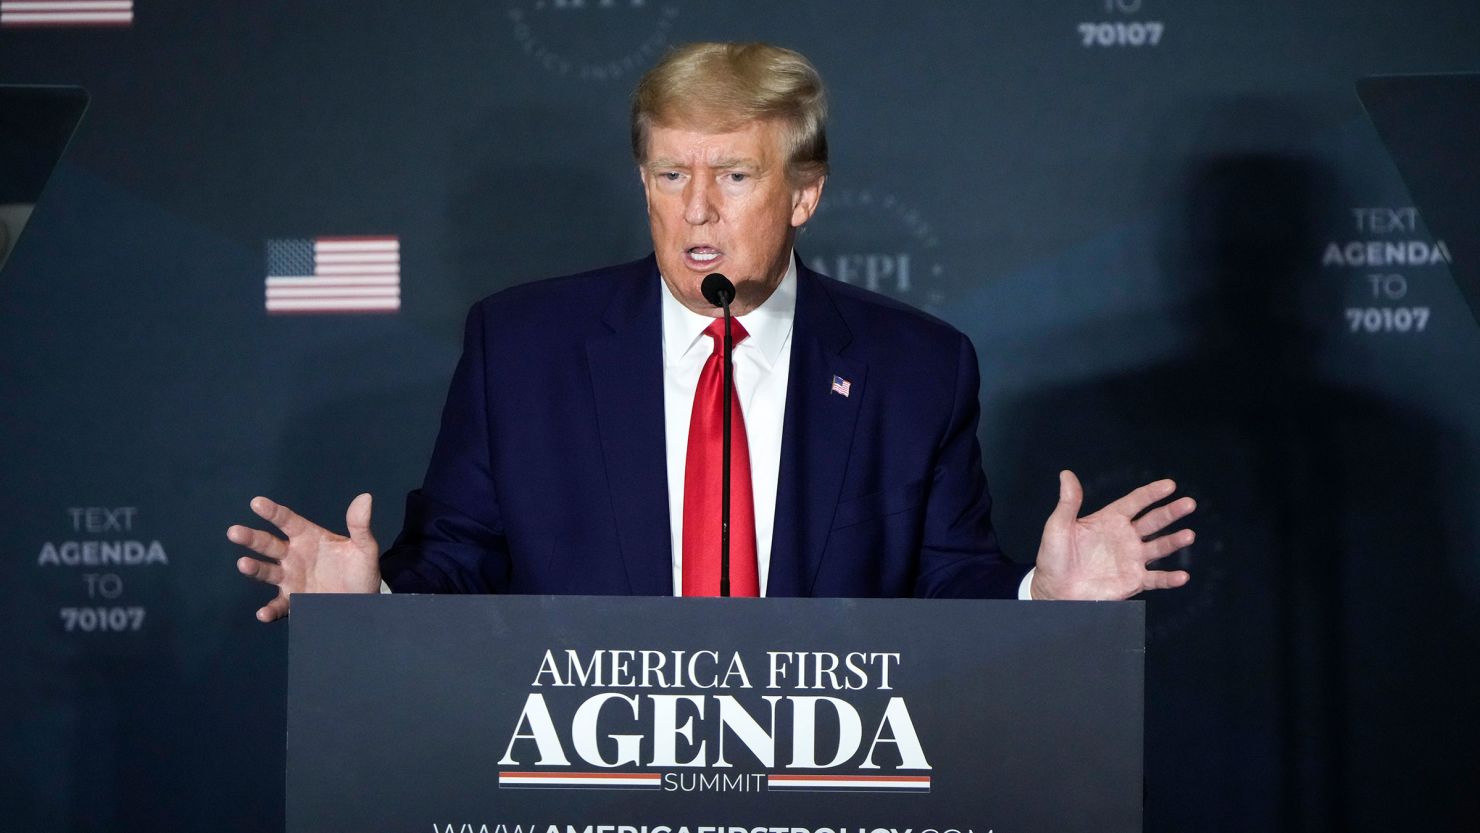 Former President Donald Trump speaks at a summit hosted by the America First Policy Institute in Washington, DC, in July 2022.